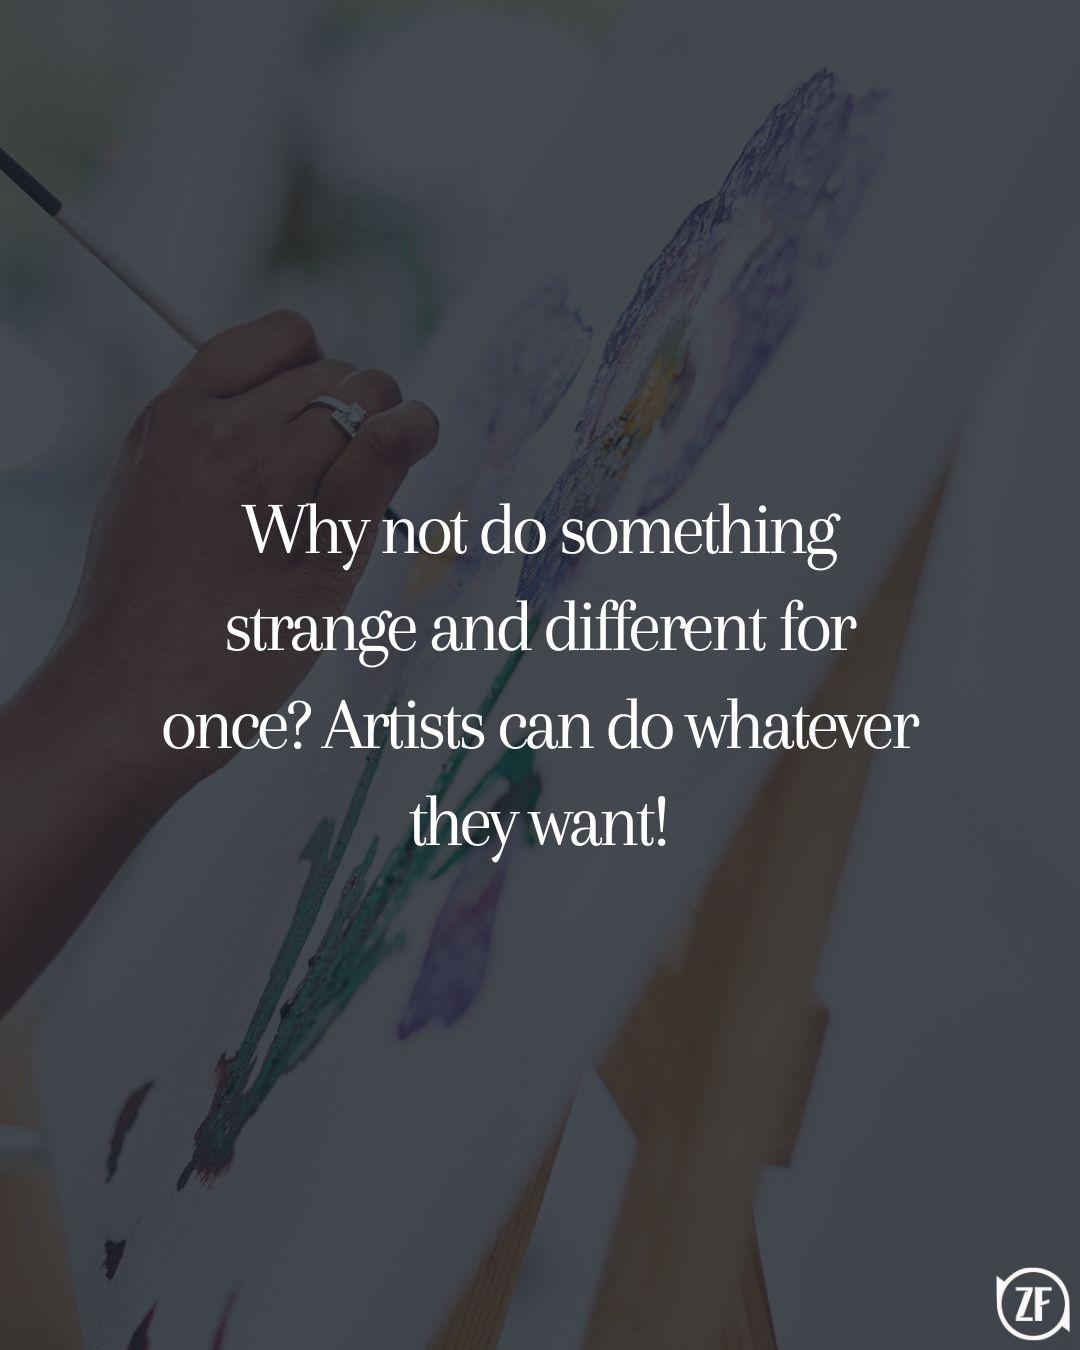 Why not do something strange and different for once Artists can do whatever they want!